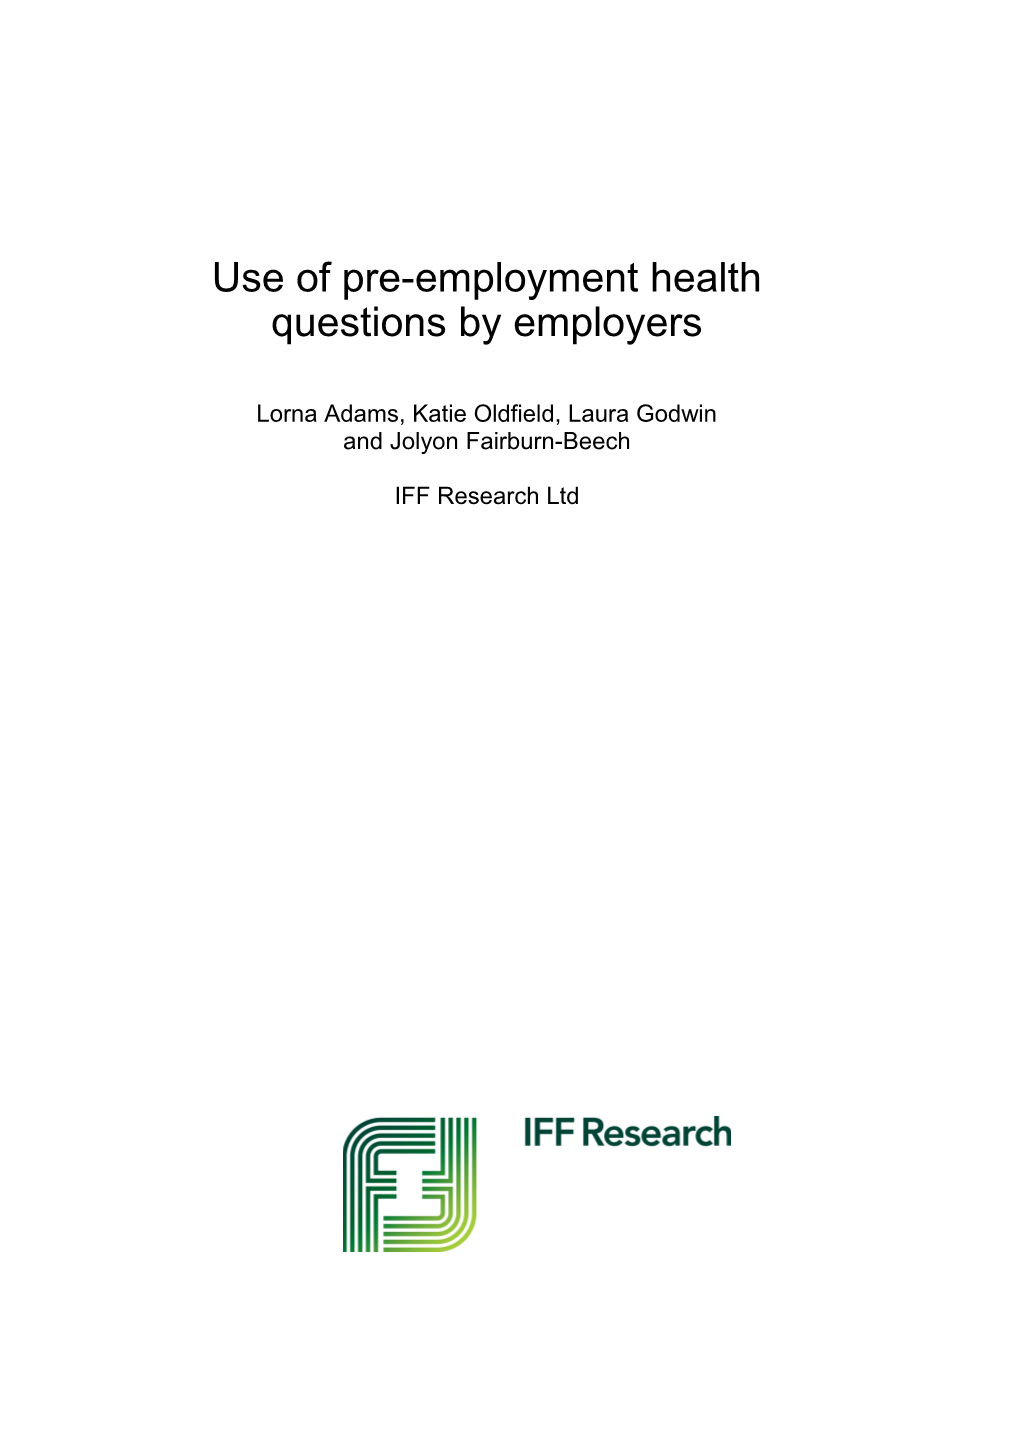 Use of Pre-Employment Health Questions by Employers